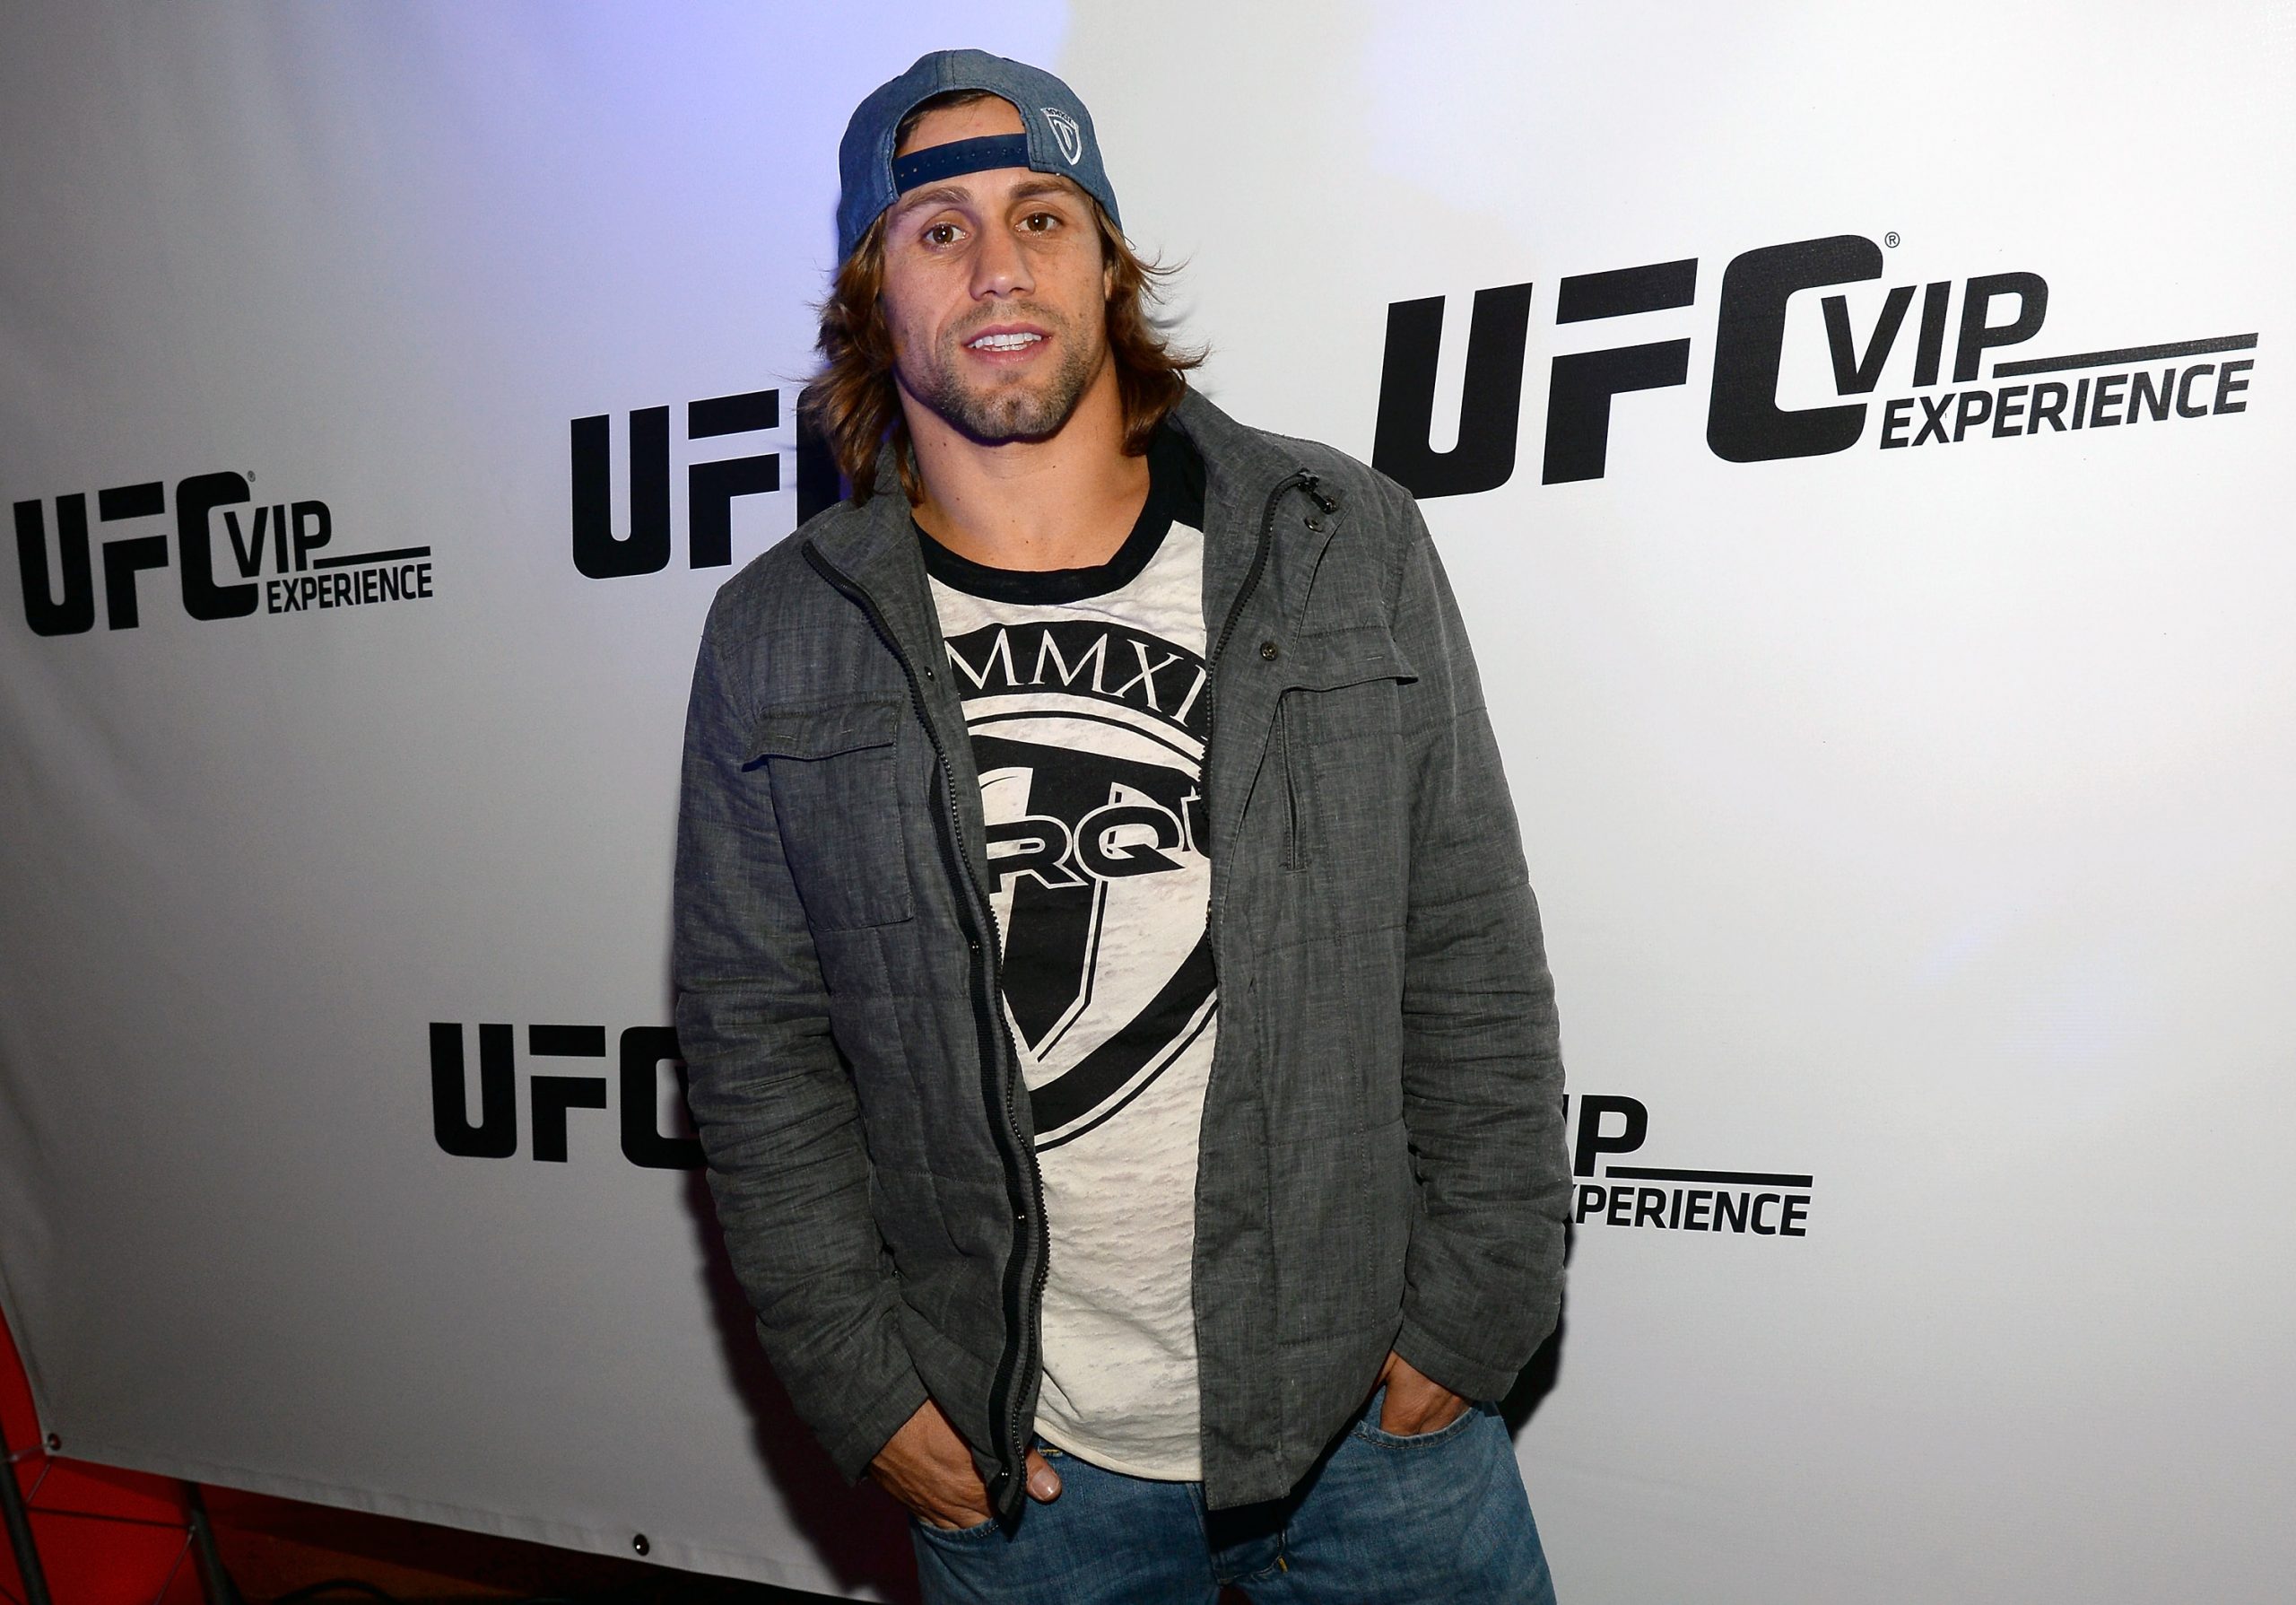 Urijah Faber is one of the most experienced UFC star